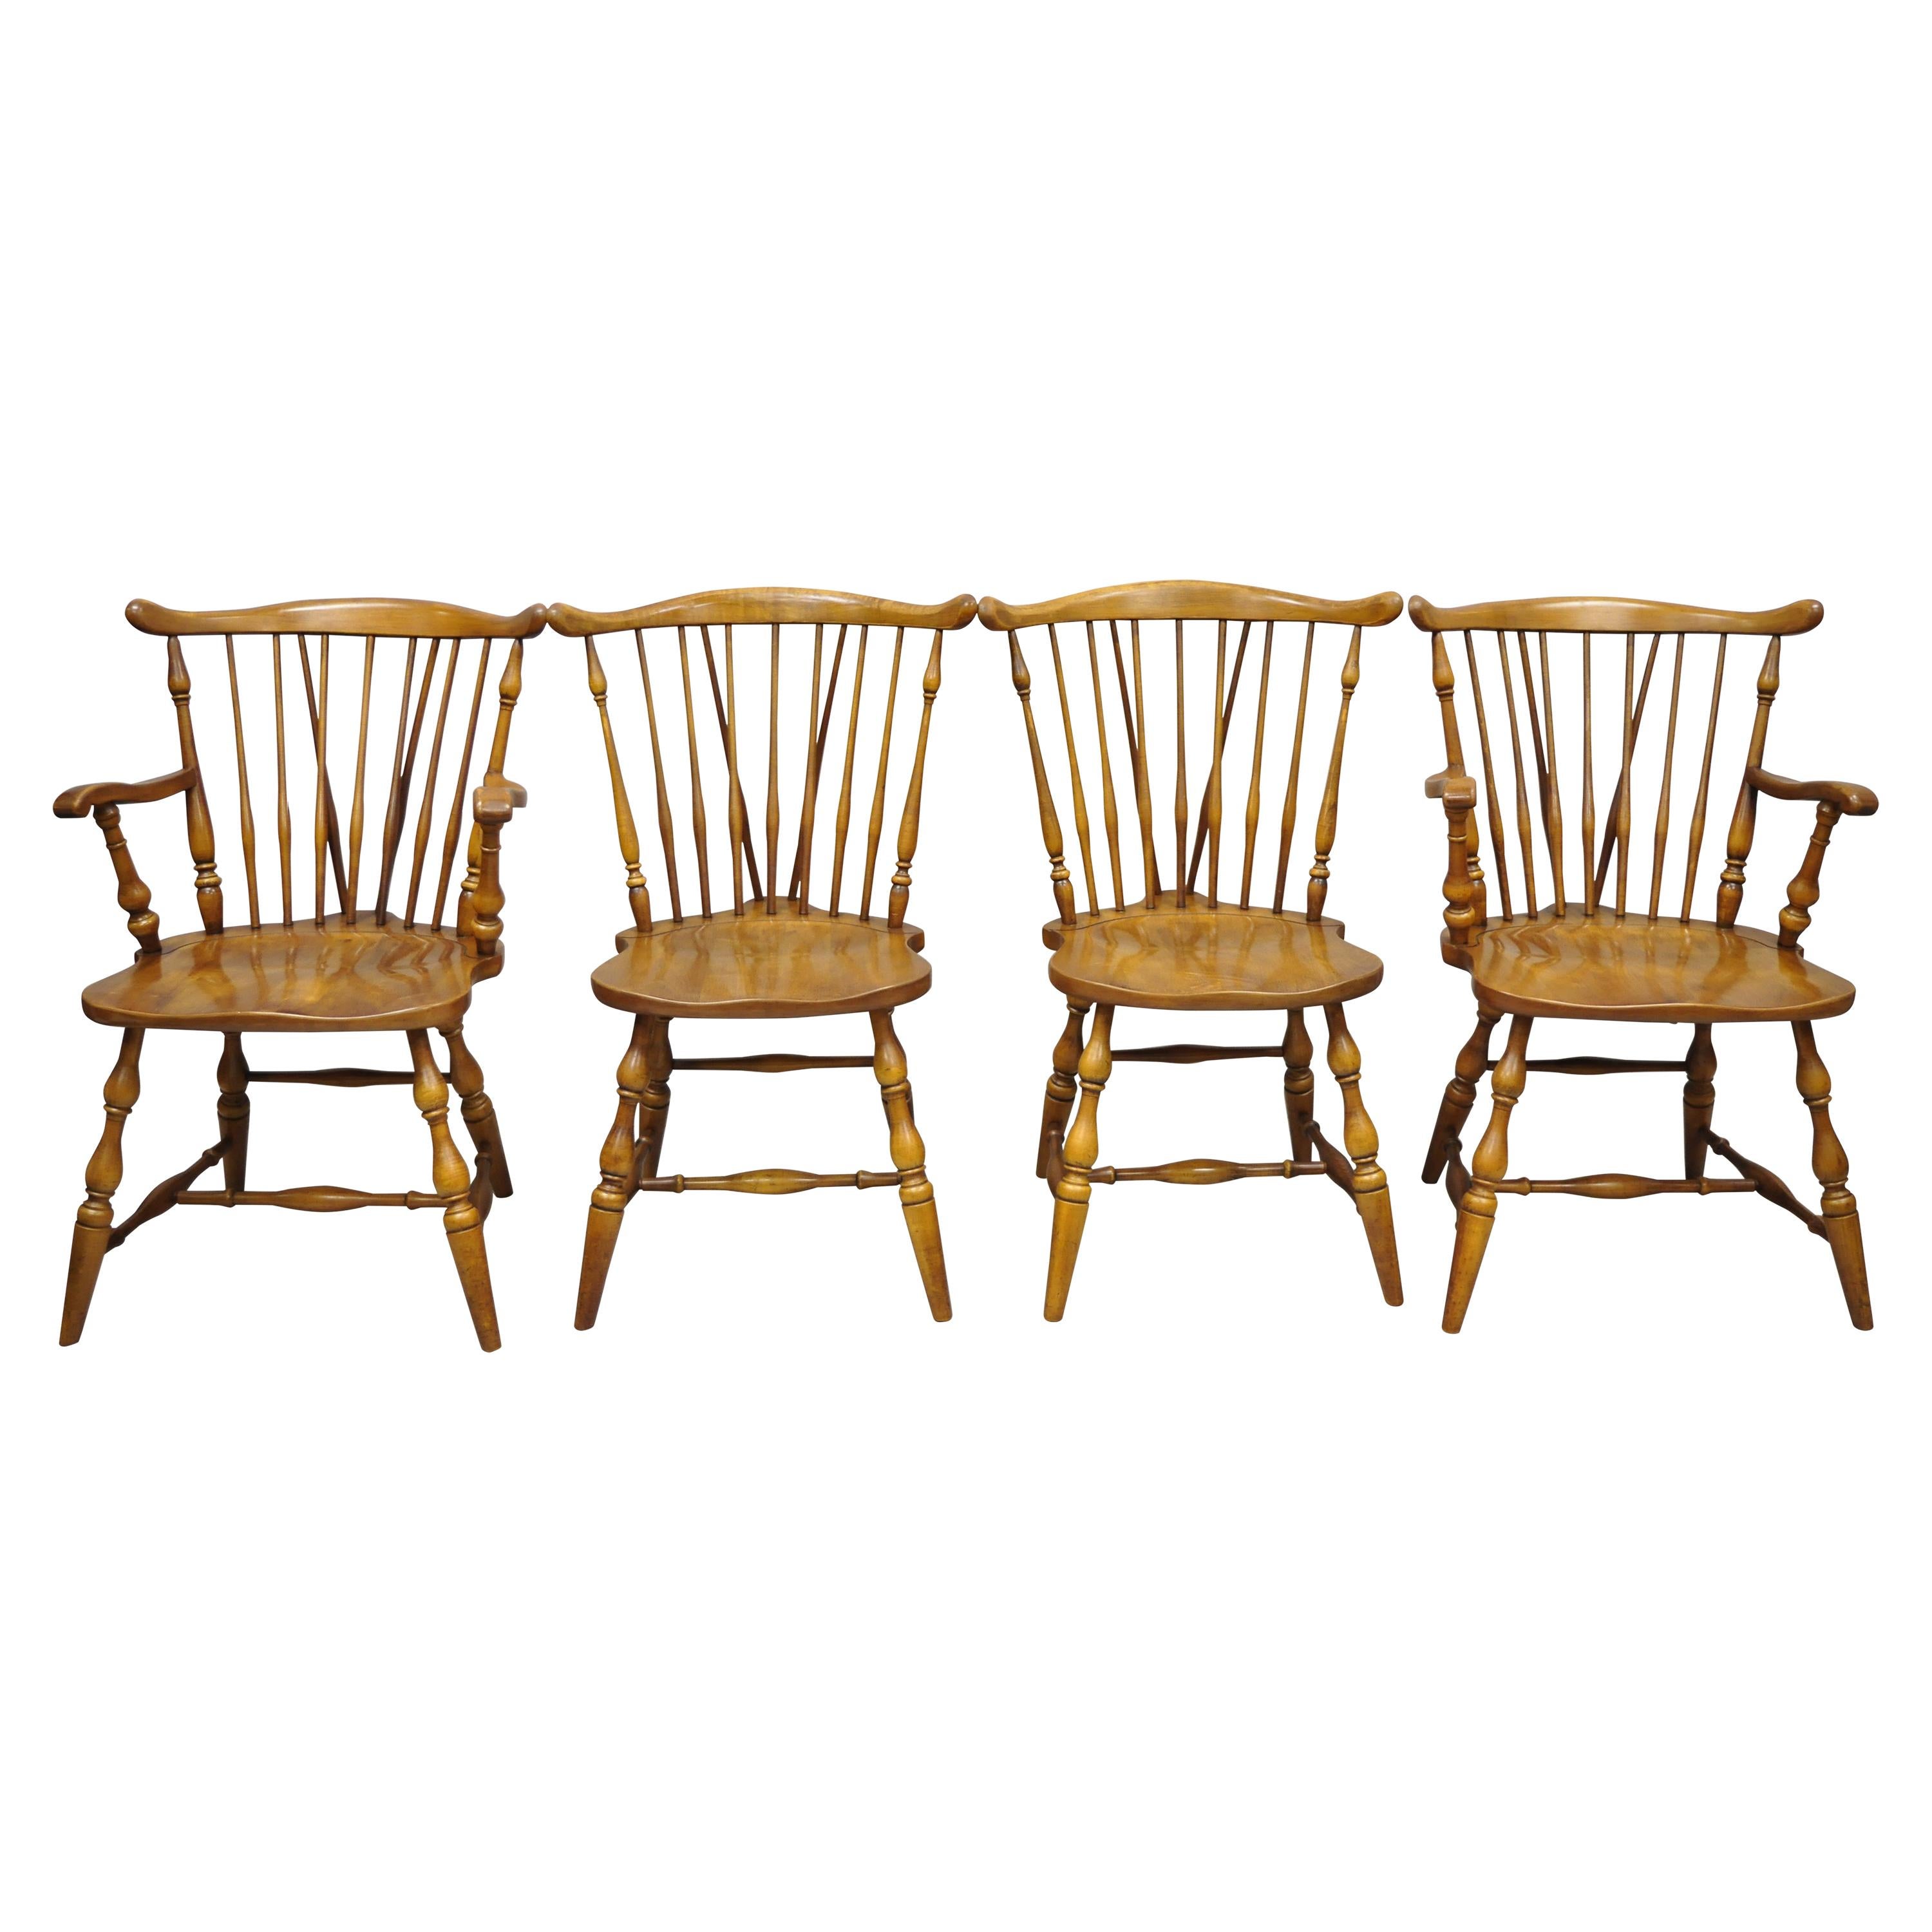 Set of 4 Pennsylvania House Rock Maple Wood Colonial Windsor Dining Chairs